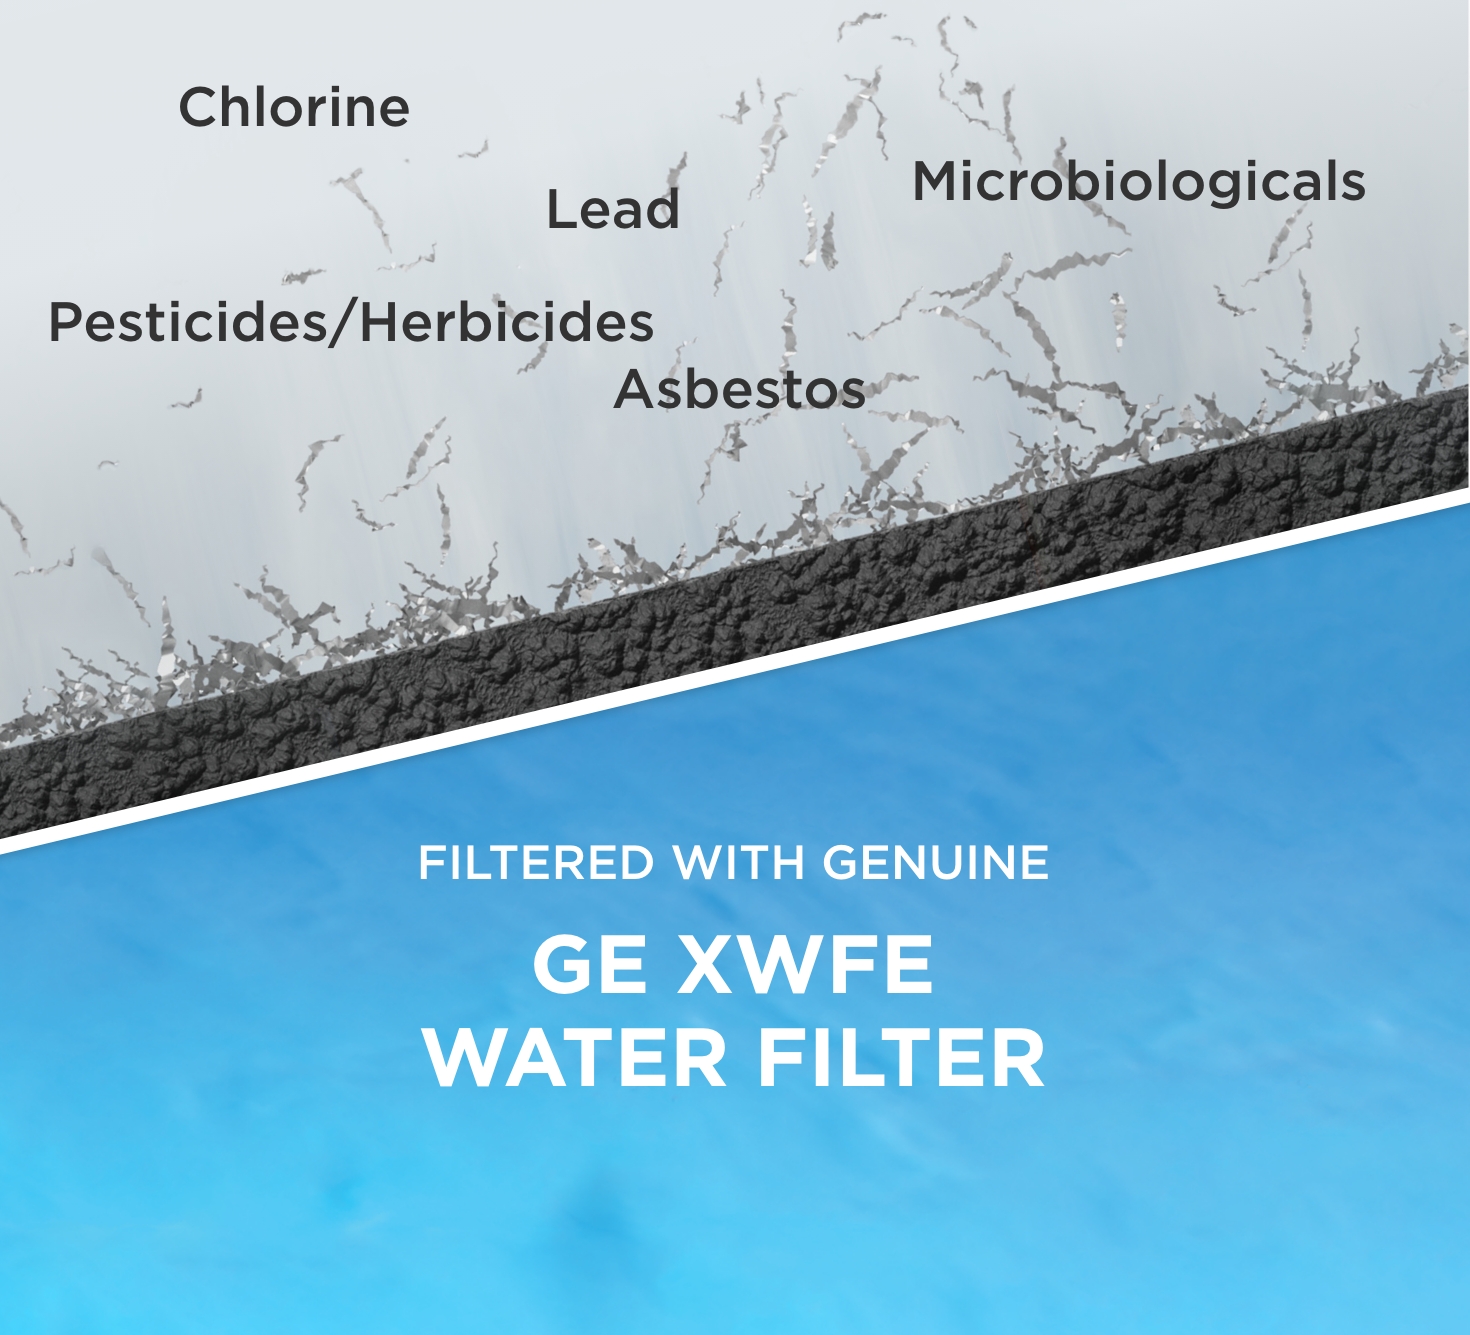 GE XWFE Water Filter Reduces 50+ impurites including 99% of Lead